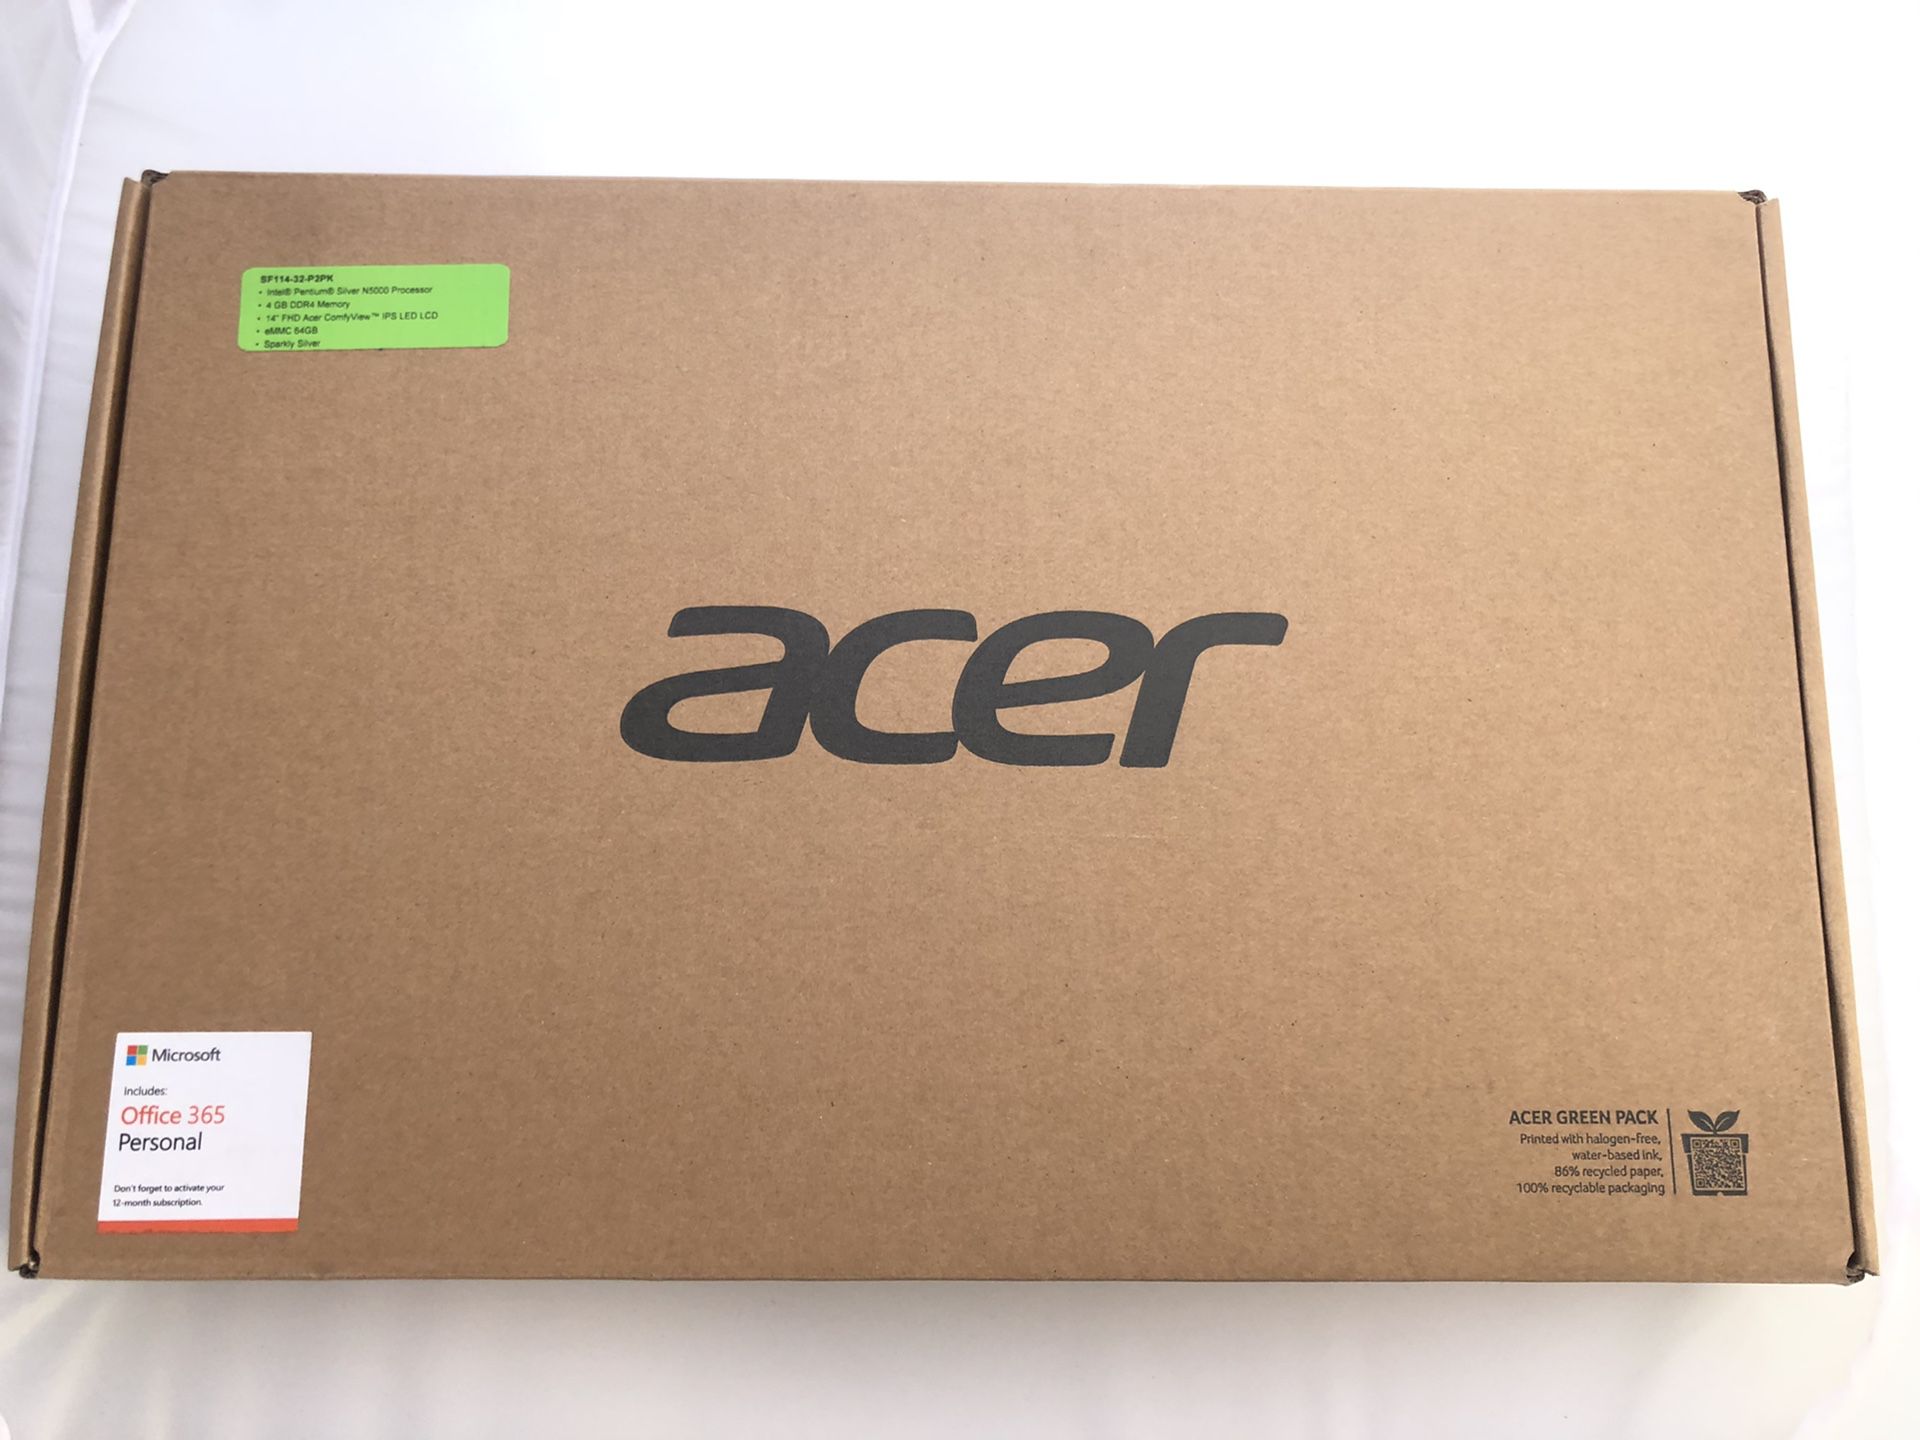 Acer Swift 1, 14" Full HD Notebook BRAND NEW FACTORY SEALED